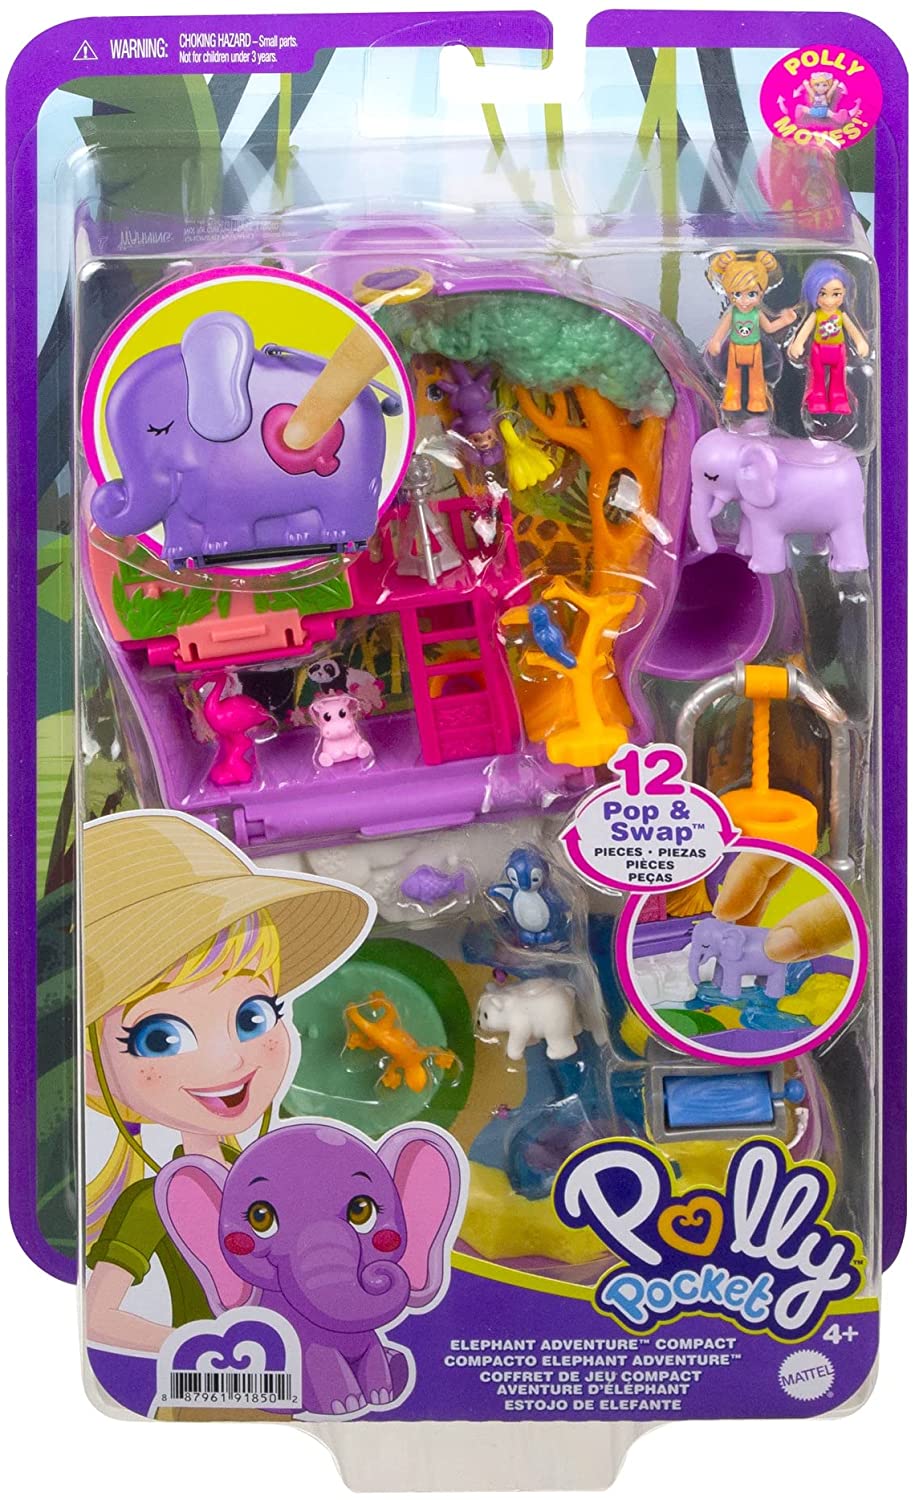 Polly Pocket Elephant Adventure Compact, Animal Theme with Micro Polly & Bella Dolls, 5 Reveals & 13 Related Accessories, Pop & Swap Feature